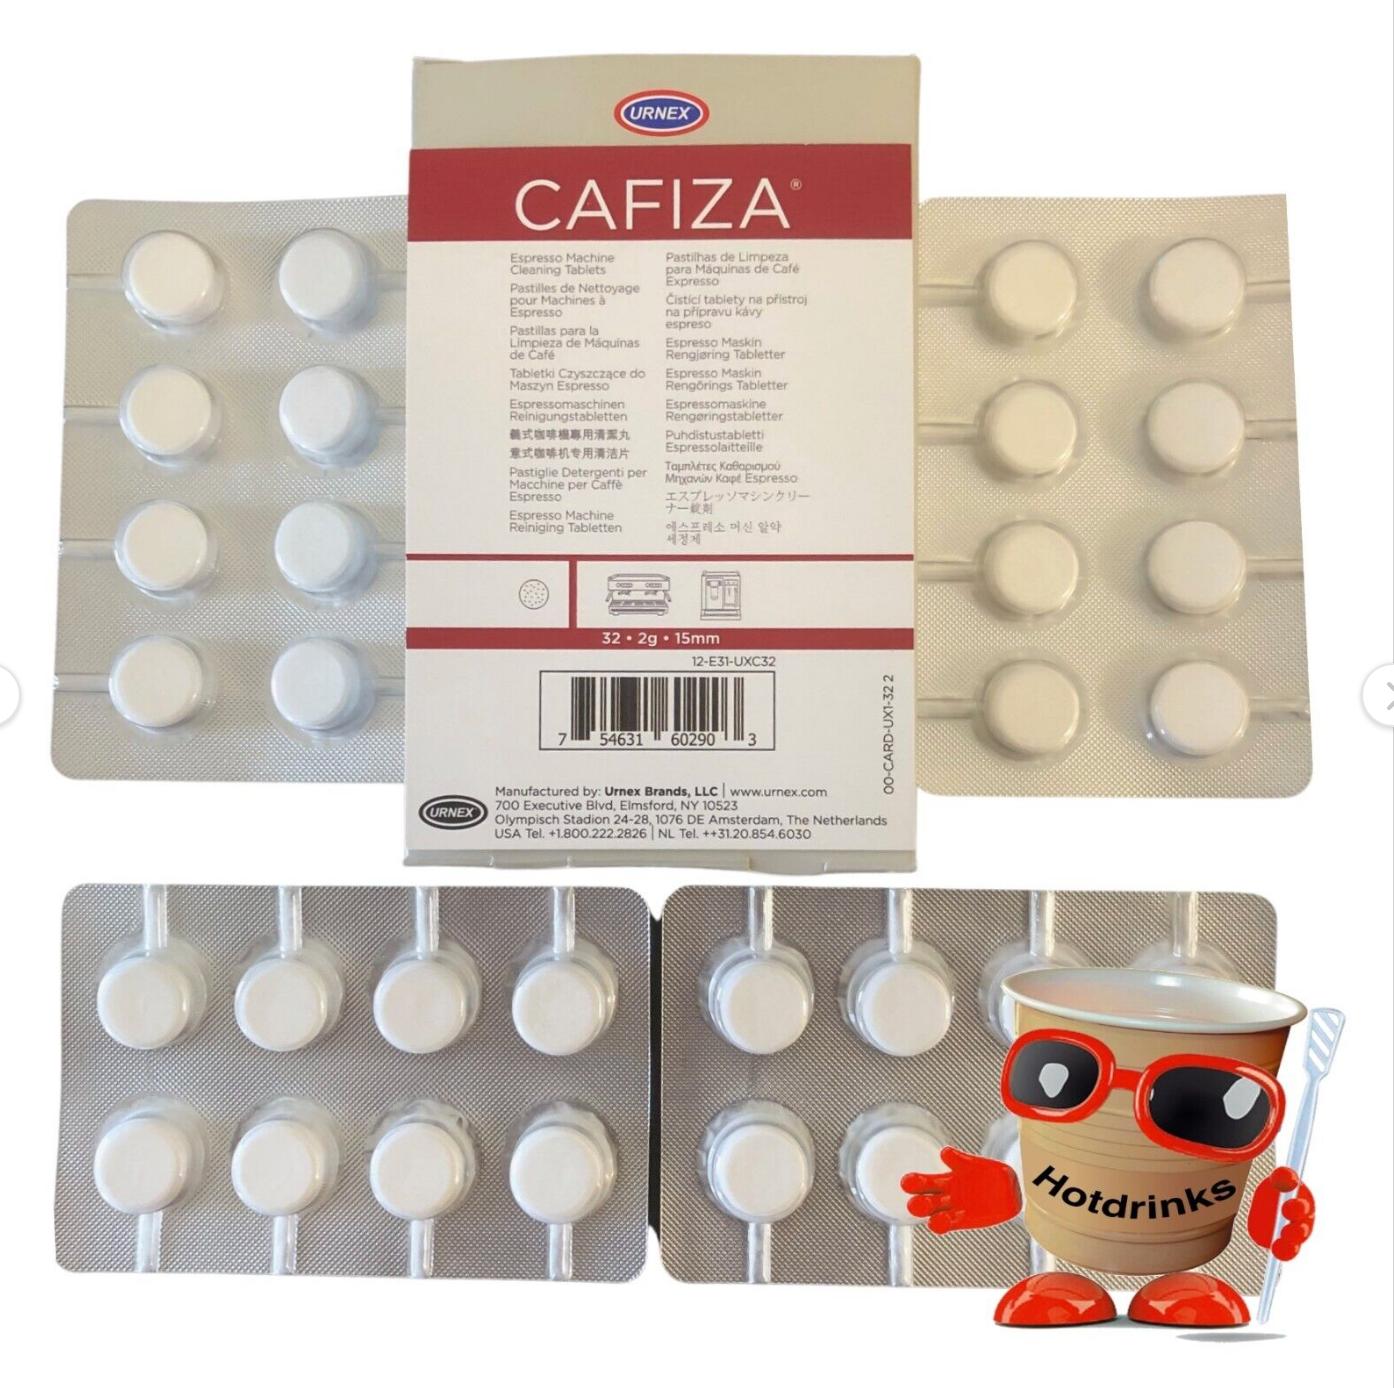 Cafiza Espresso Machine Cleaning Tablets - Pack Of 32 x 2g